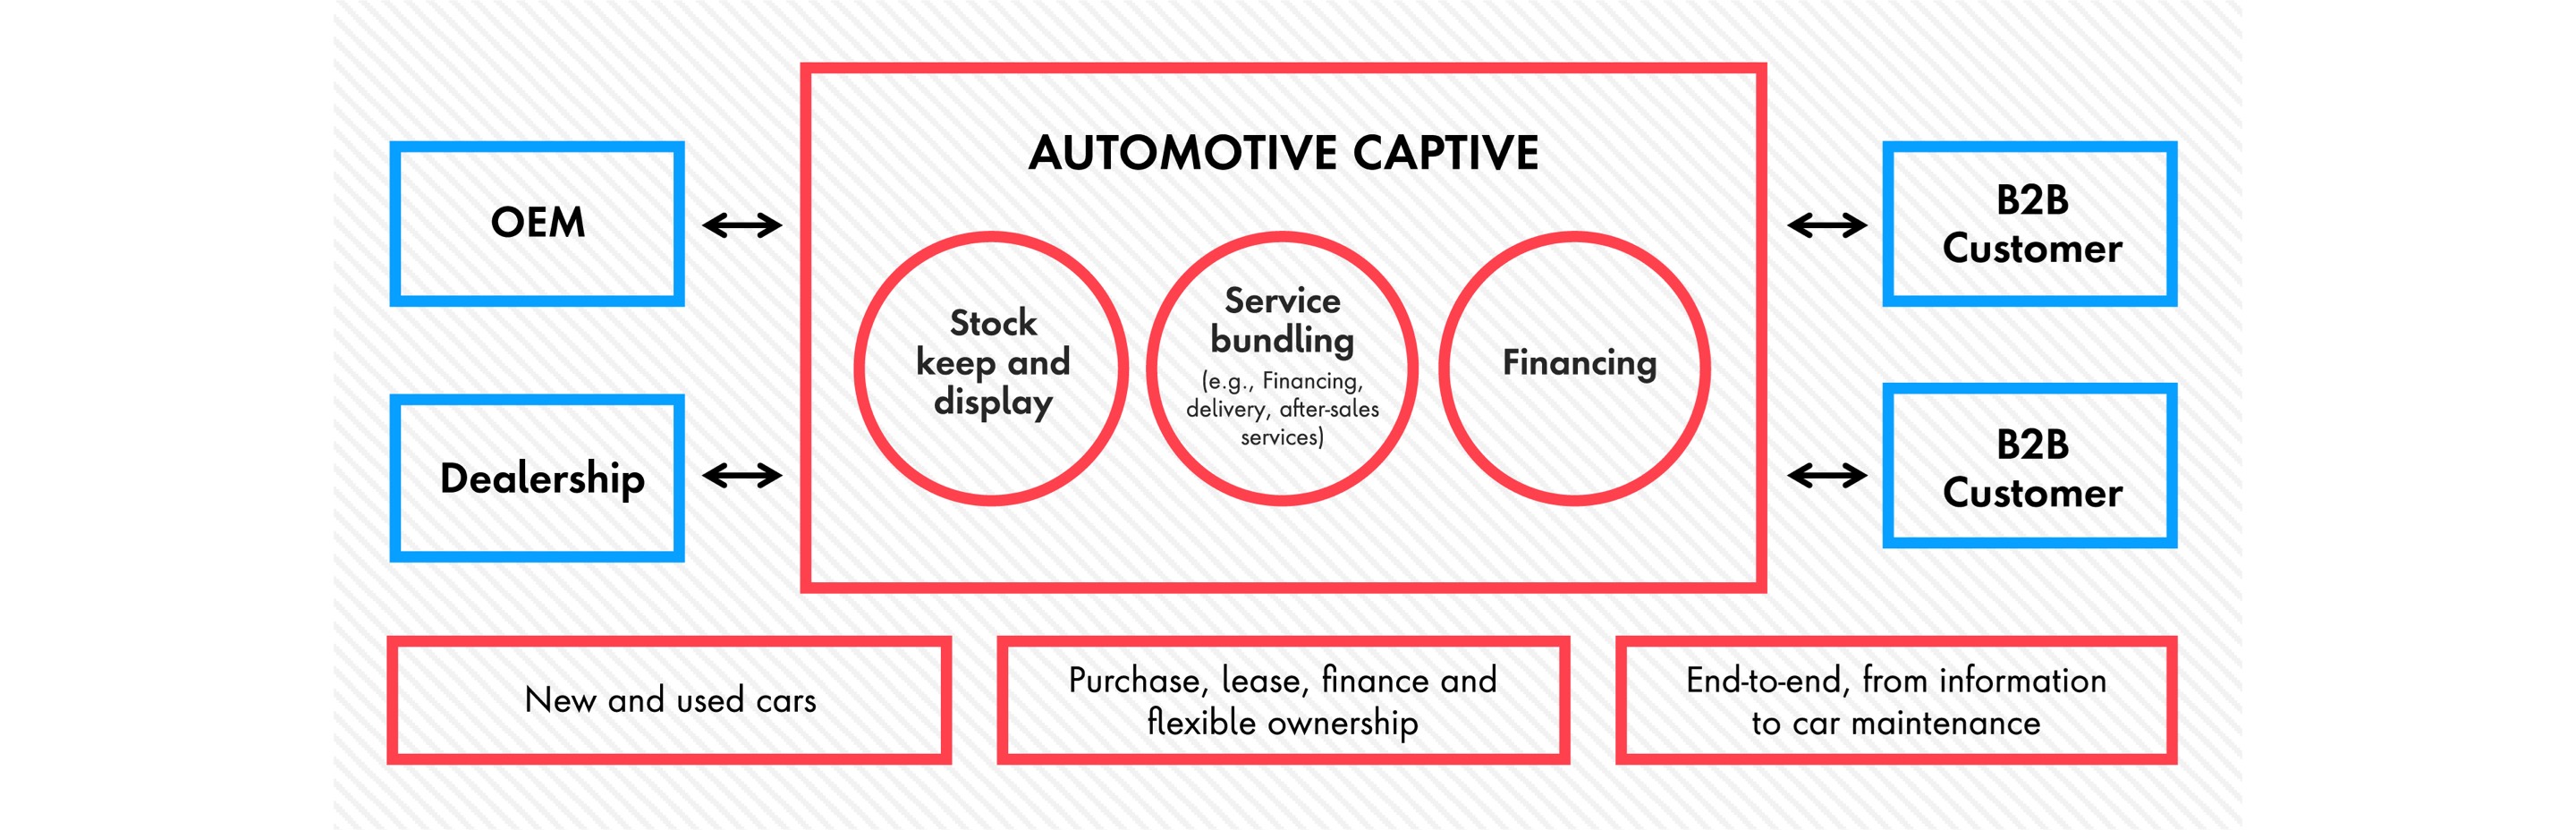 Graphic chart depicting the automative captive’s place in the center of the automotive industry—servicing OEMs, dealerships and B2B customers with stock keep and display, service bundling, and financing.